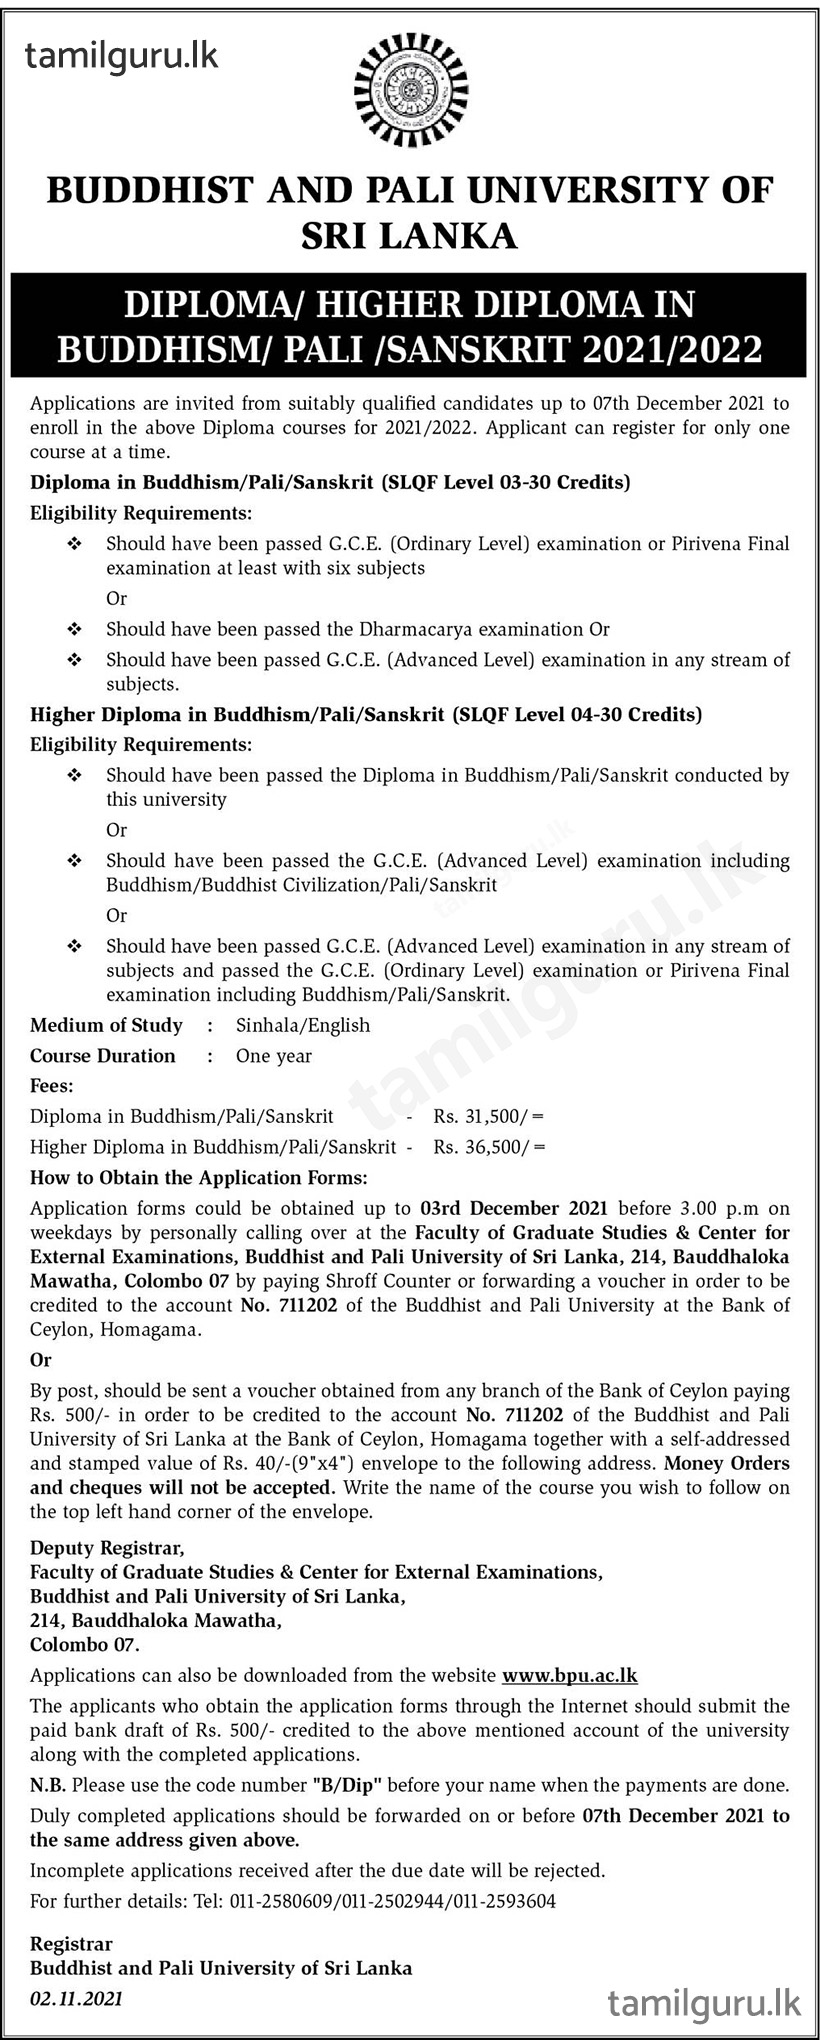 Calling Applications for Diploma / Higher Diploma Courses in Buddhism, Pali, Sanskrit 2021/2022 - Buddhist and Pali University (BPU)